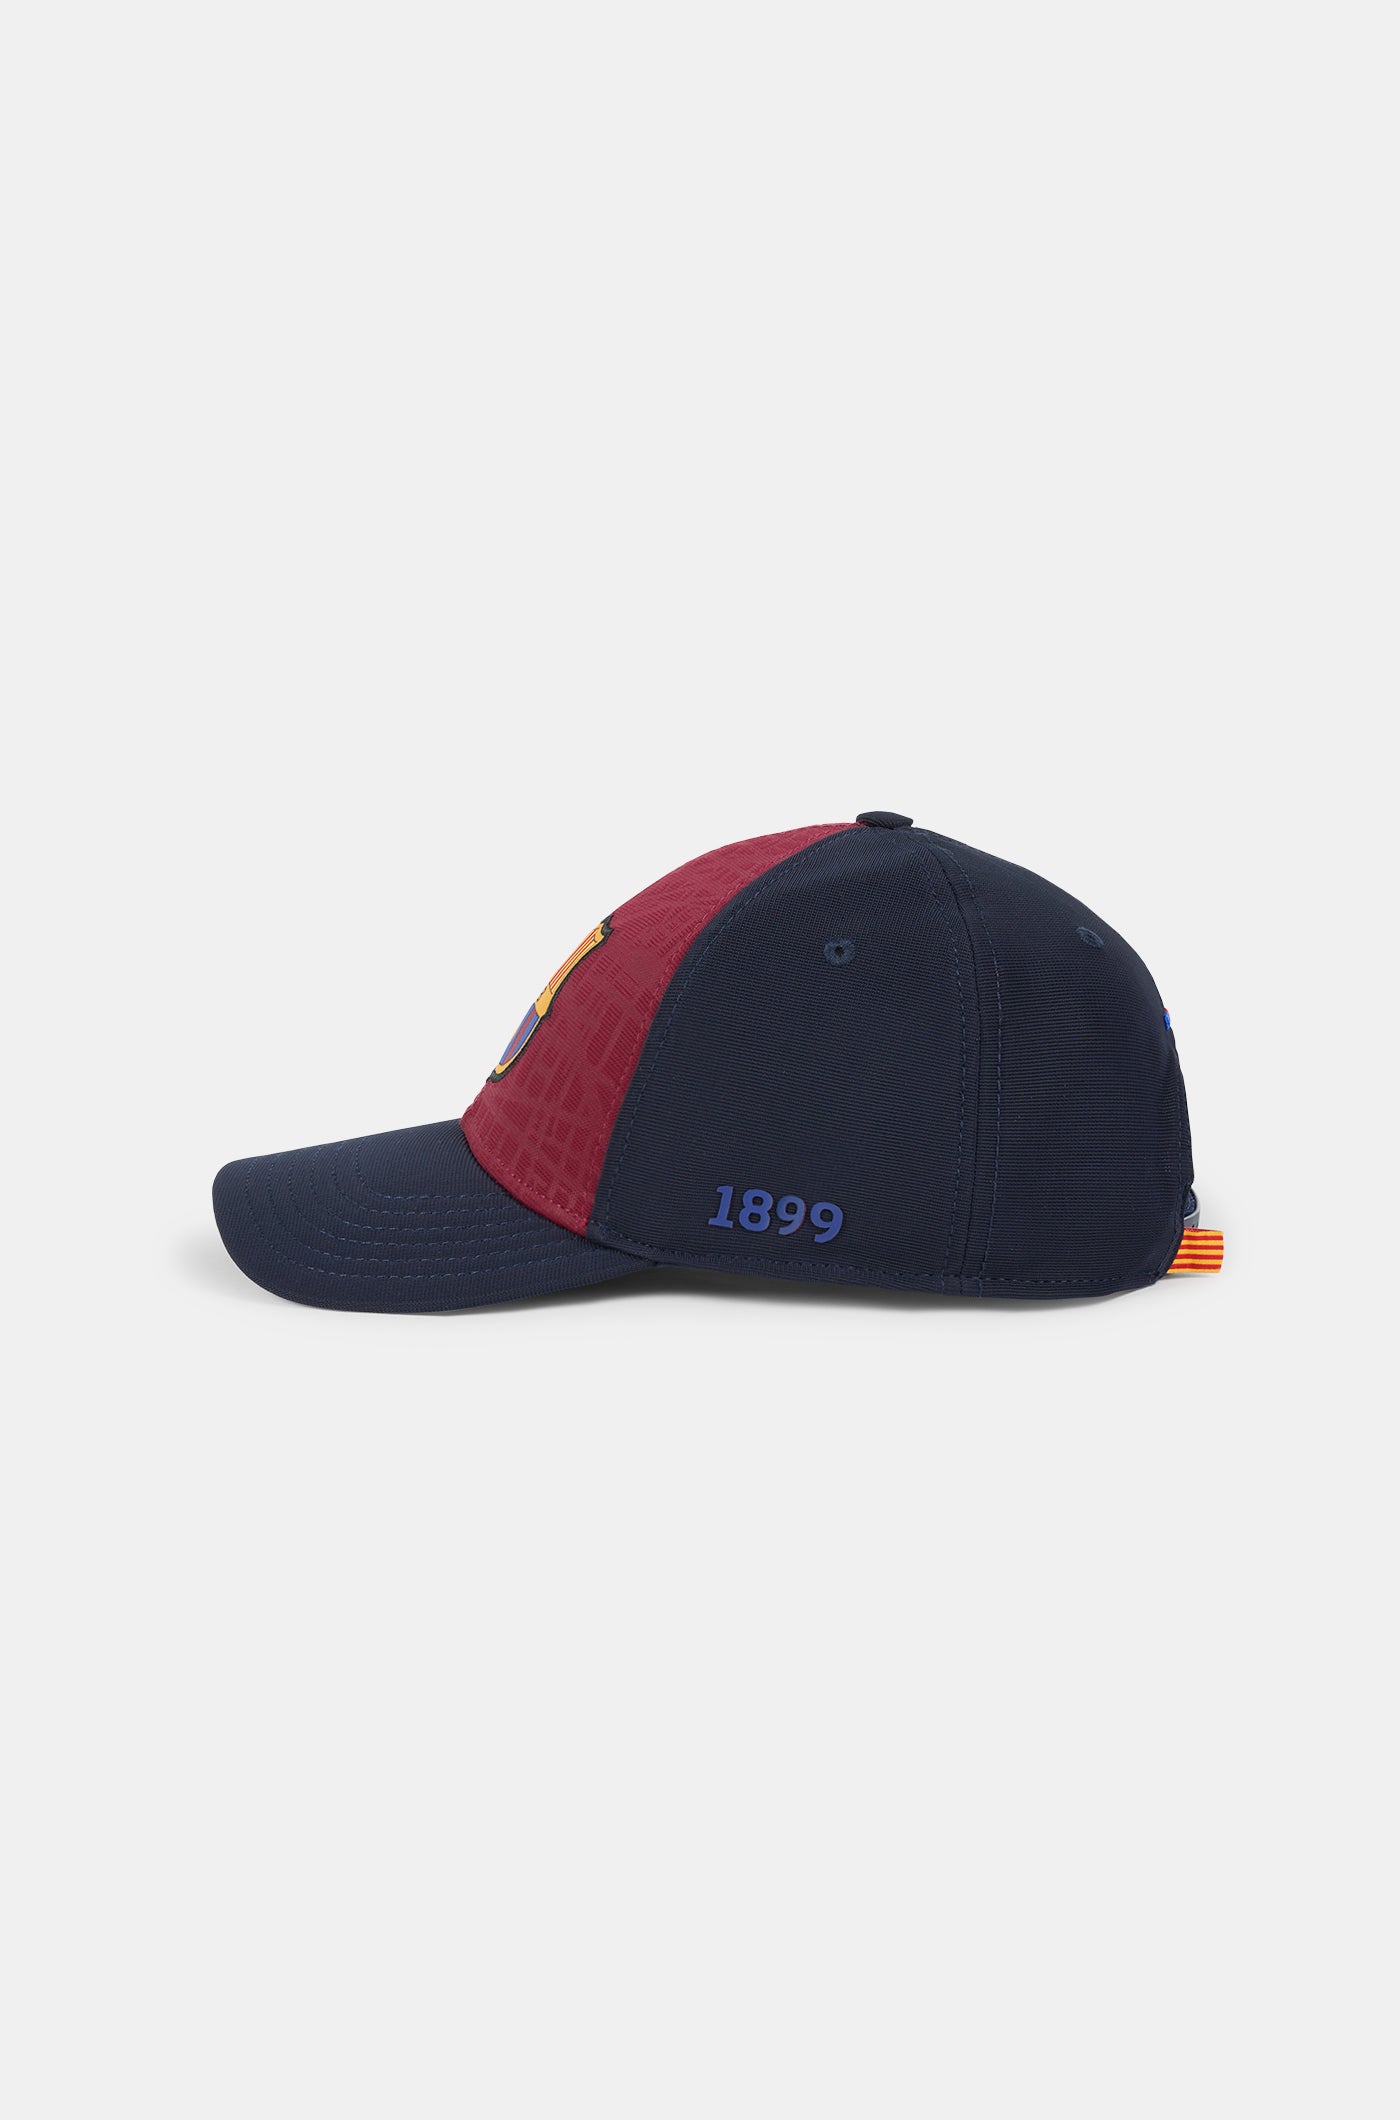 FC Barcelona cap with crest 1899